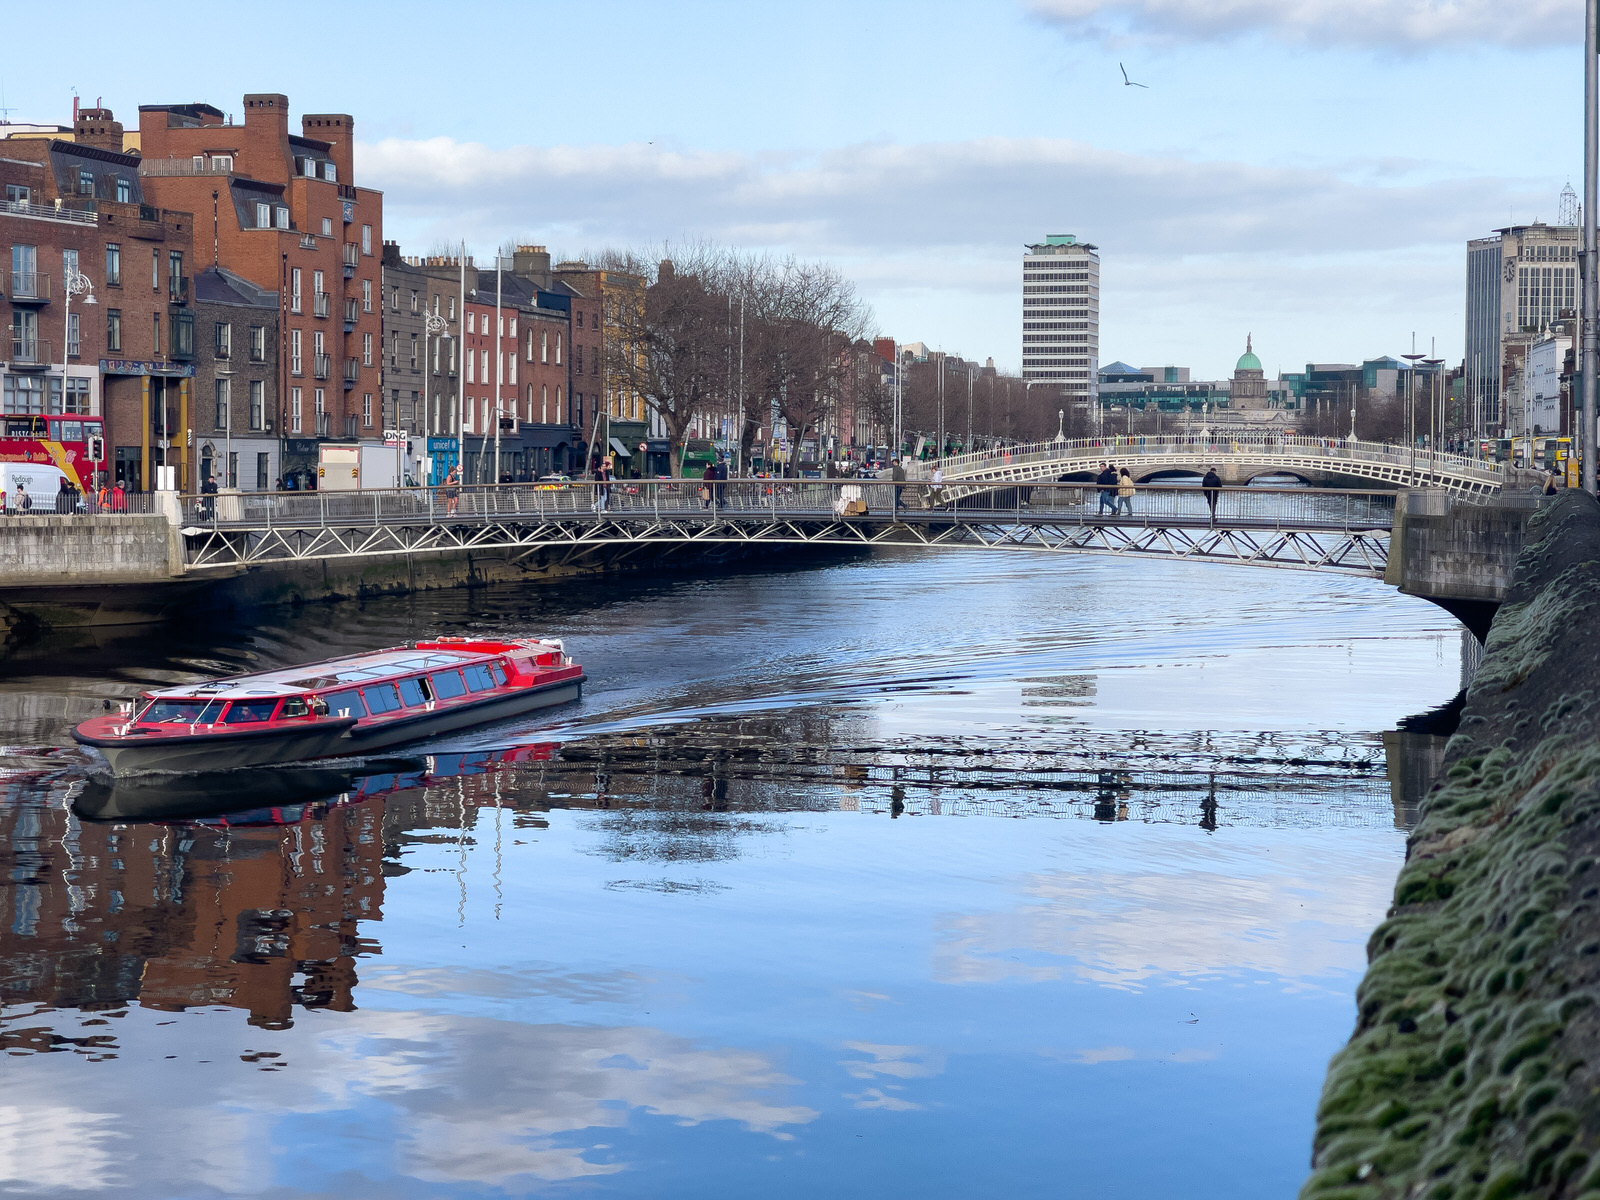 I HAD NOTHING BETTER TO DO [SO I PHOTOGRAPHED THE SPIRIT OF THE DOCKLANDS TURNING ON THE RIVER LIFFEY]-229437-1